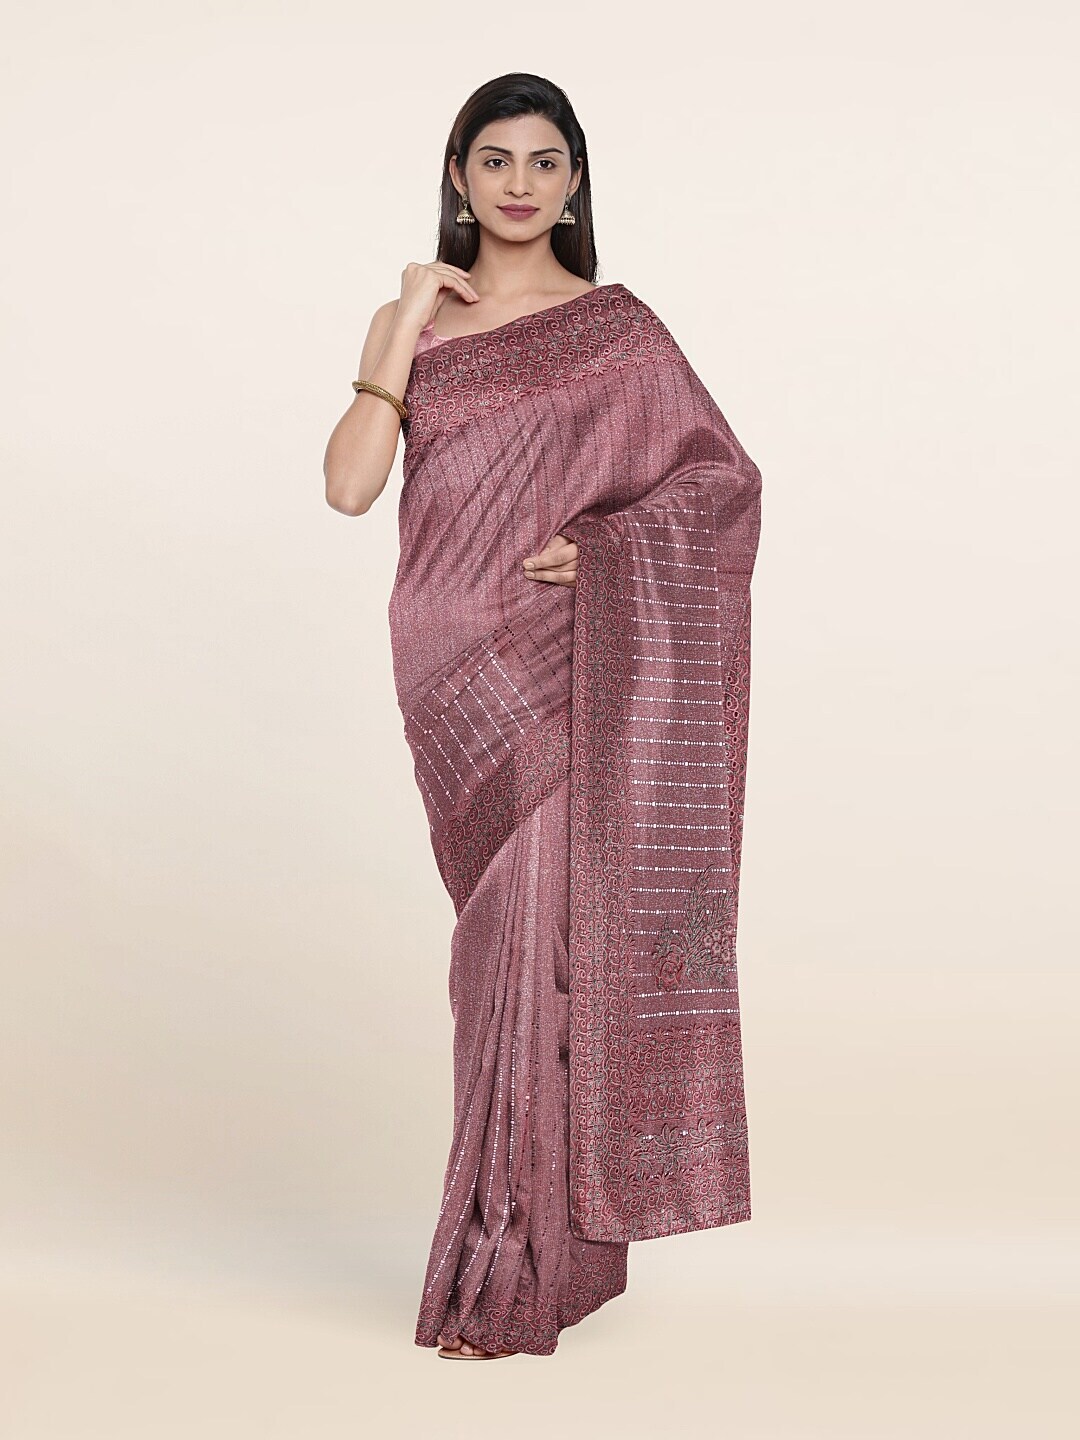 Pothys Pink Striped Beads and Stones Saree Price in India